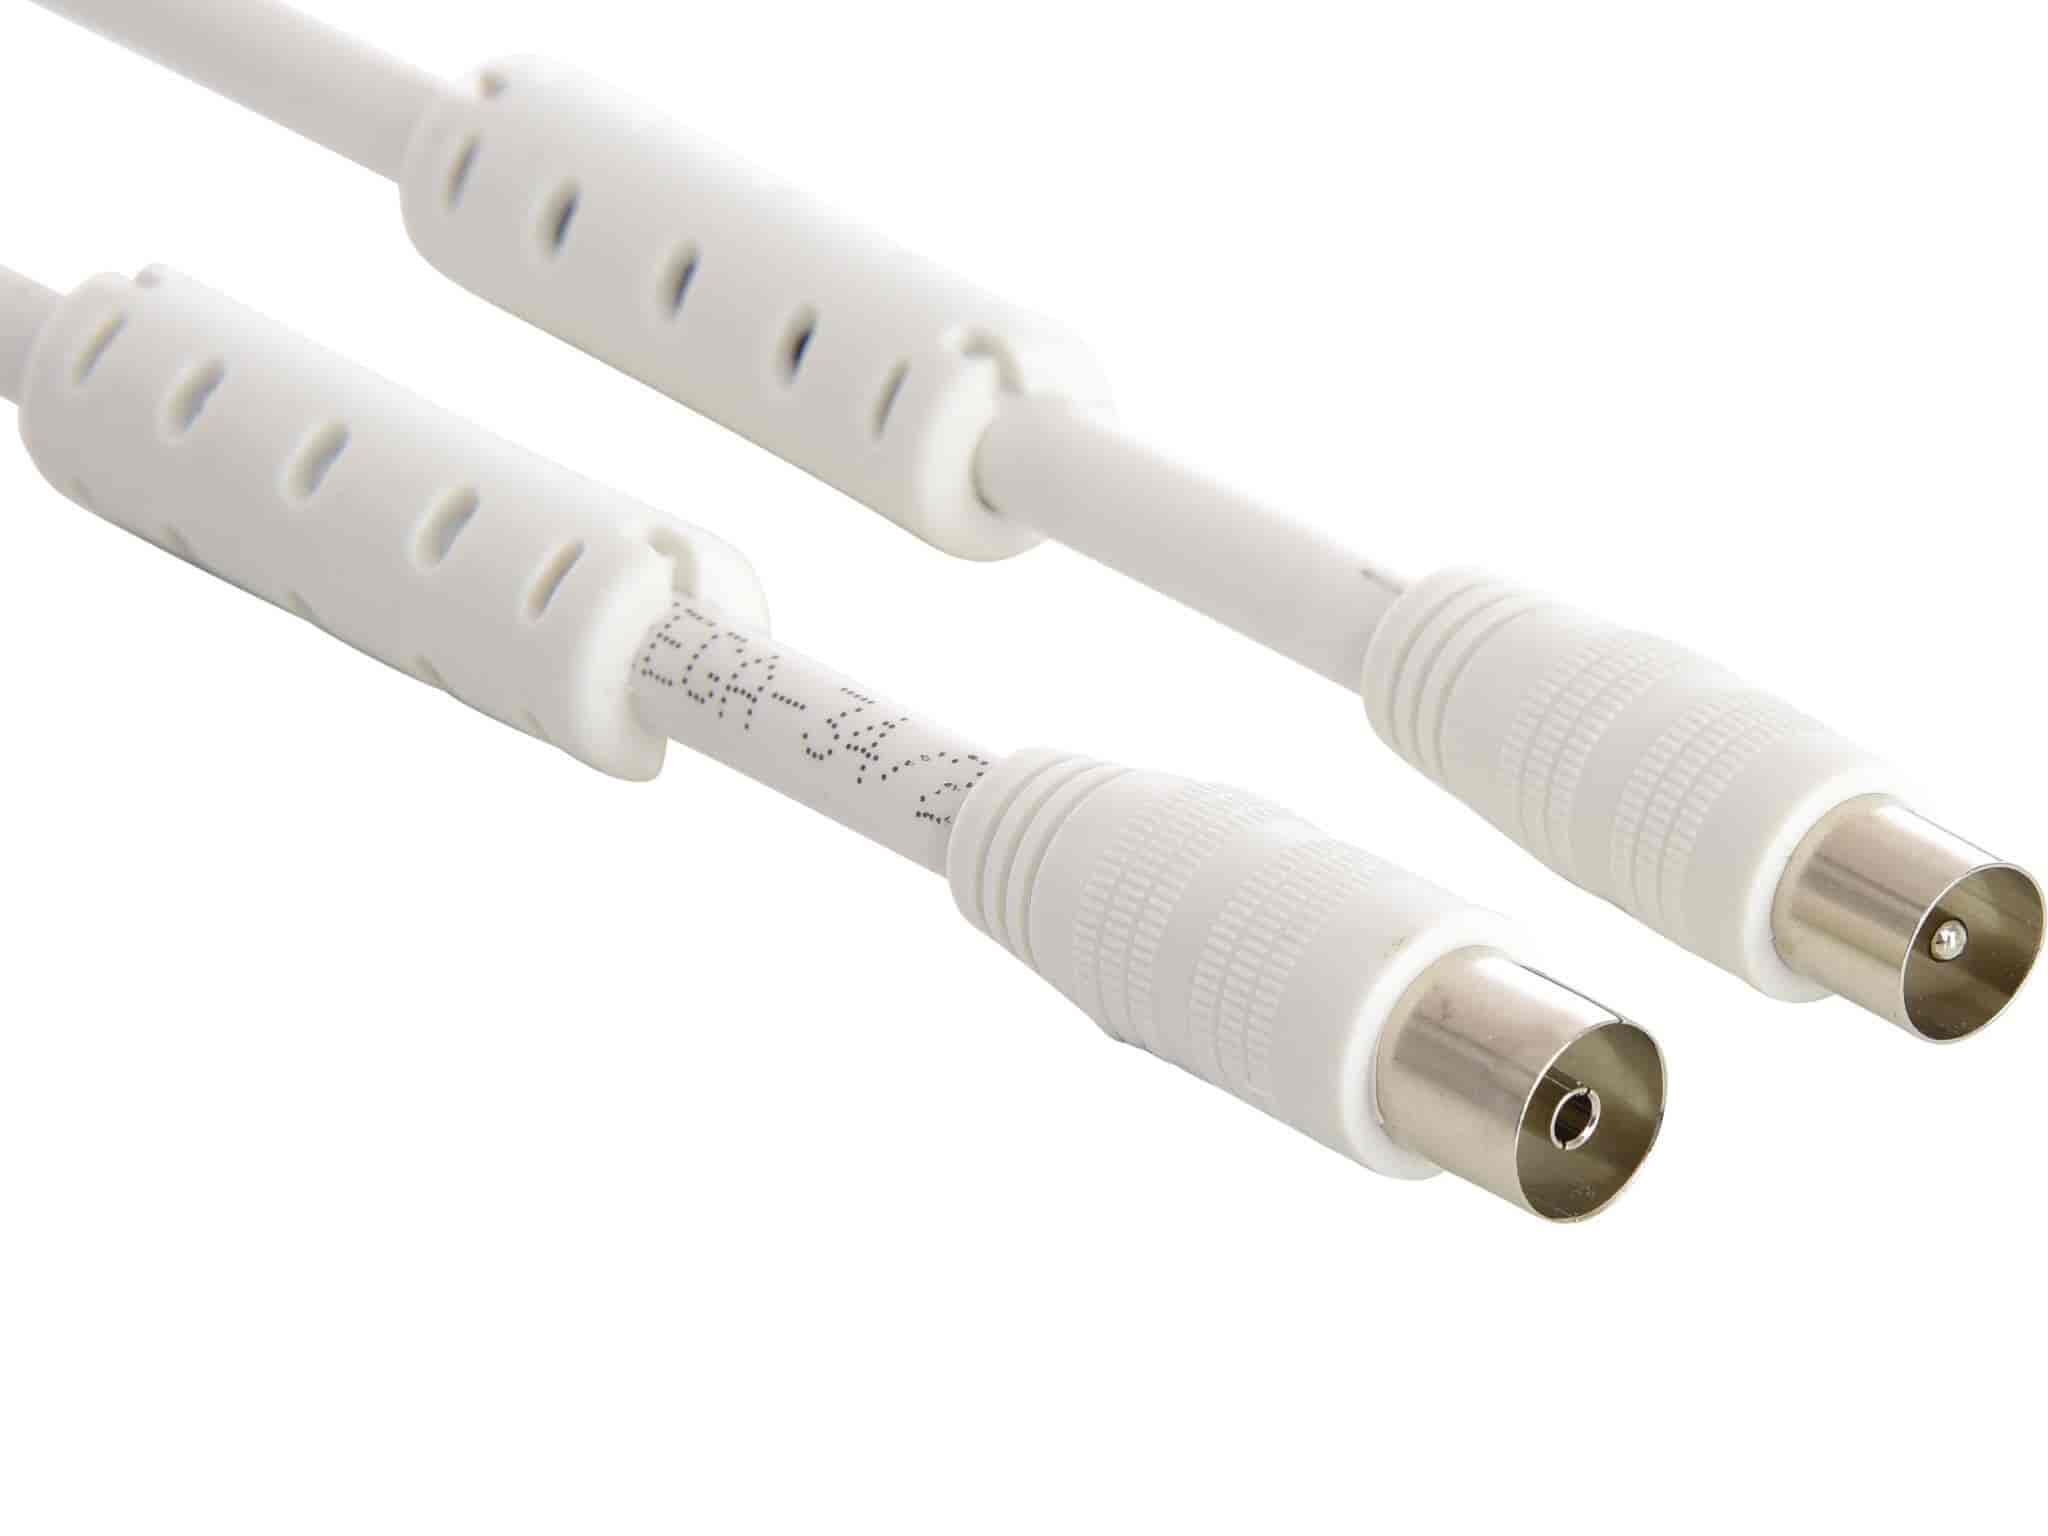 Sandberg Aerial cable LTE protected 3mAerial cable for use with ordinary aerial devices, generally radios or TVs. The cable is made from high-quality materials, ensuring optimal signal quality without noise and interference, specially optimised to produce a razor-sharp picture on your flat screen TV.Sandberg